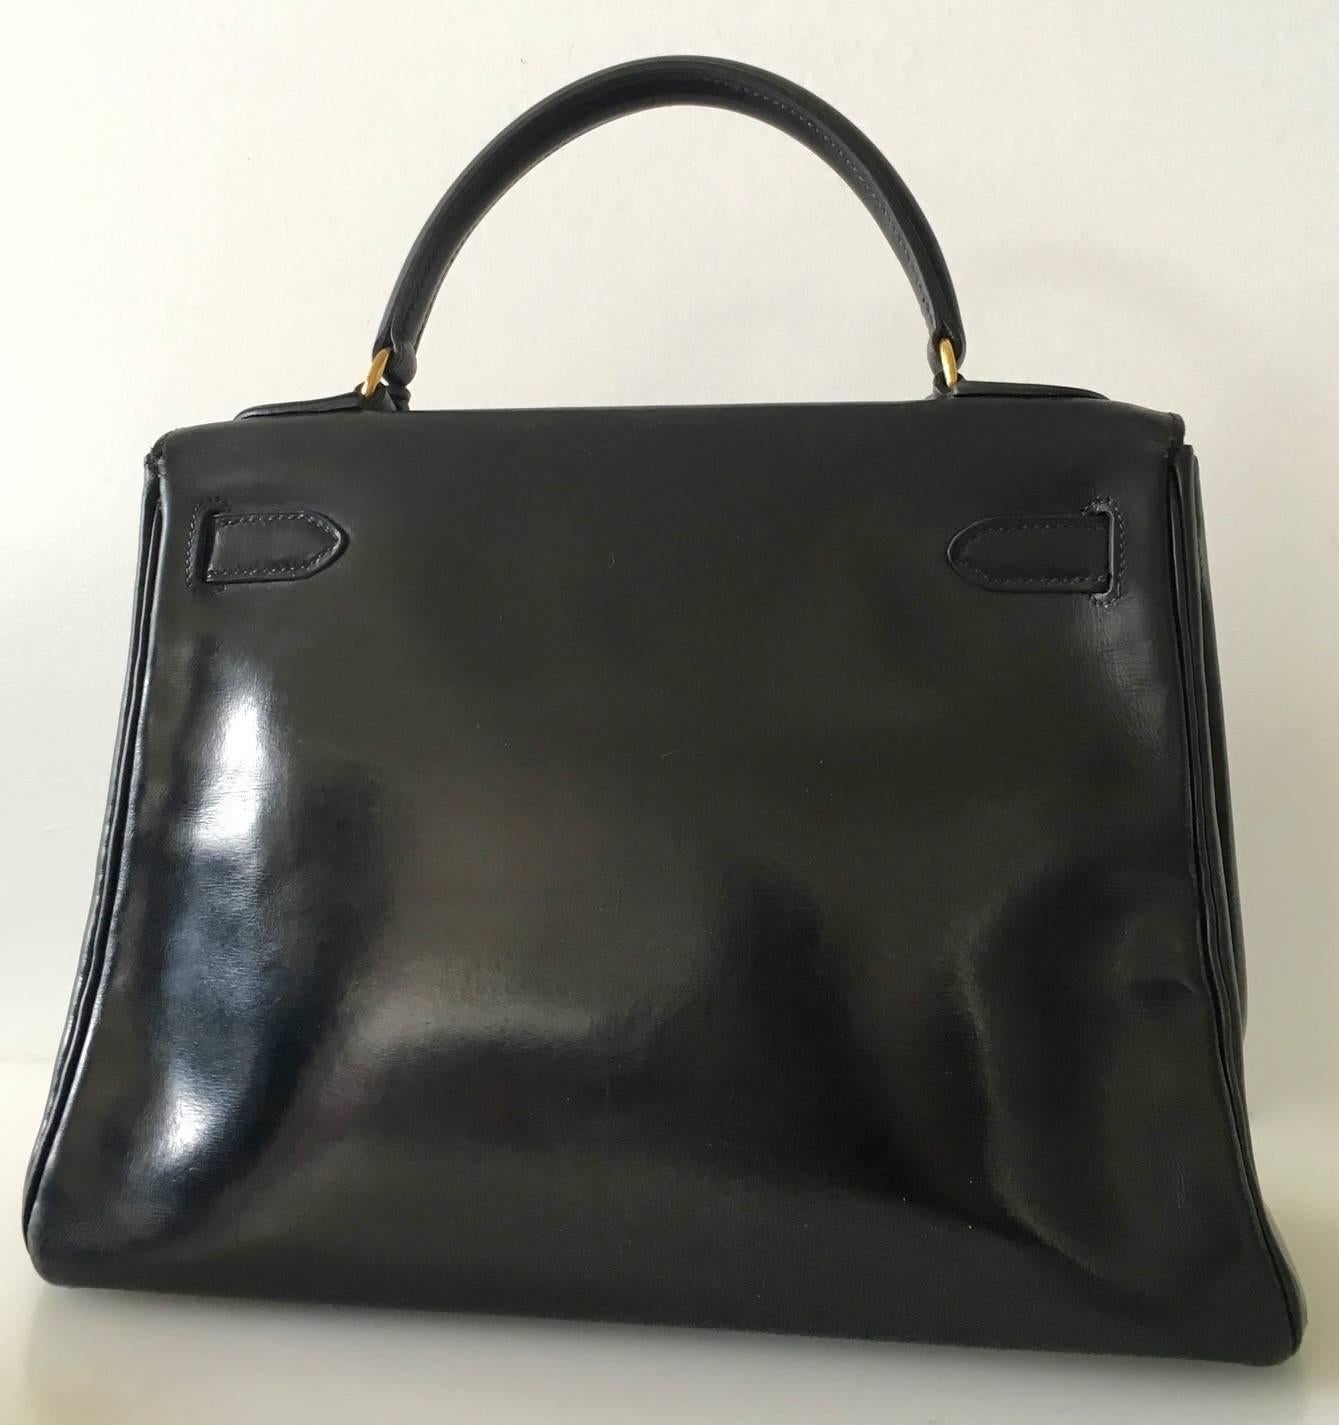 Hermès Kelly 28 Black box leather
 
Box « Retourne » leather in black color
Gold plated hardware
 
Good condition - Normal use
 
Usual scratches leather
Gentle scratches on hardware
Corners are good.
Interior is clean
Handle is in